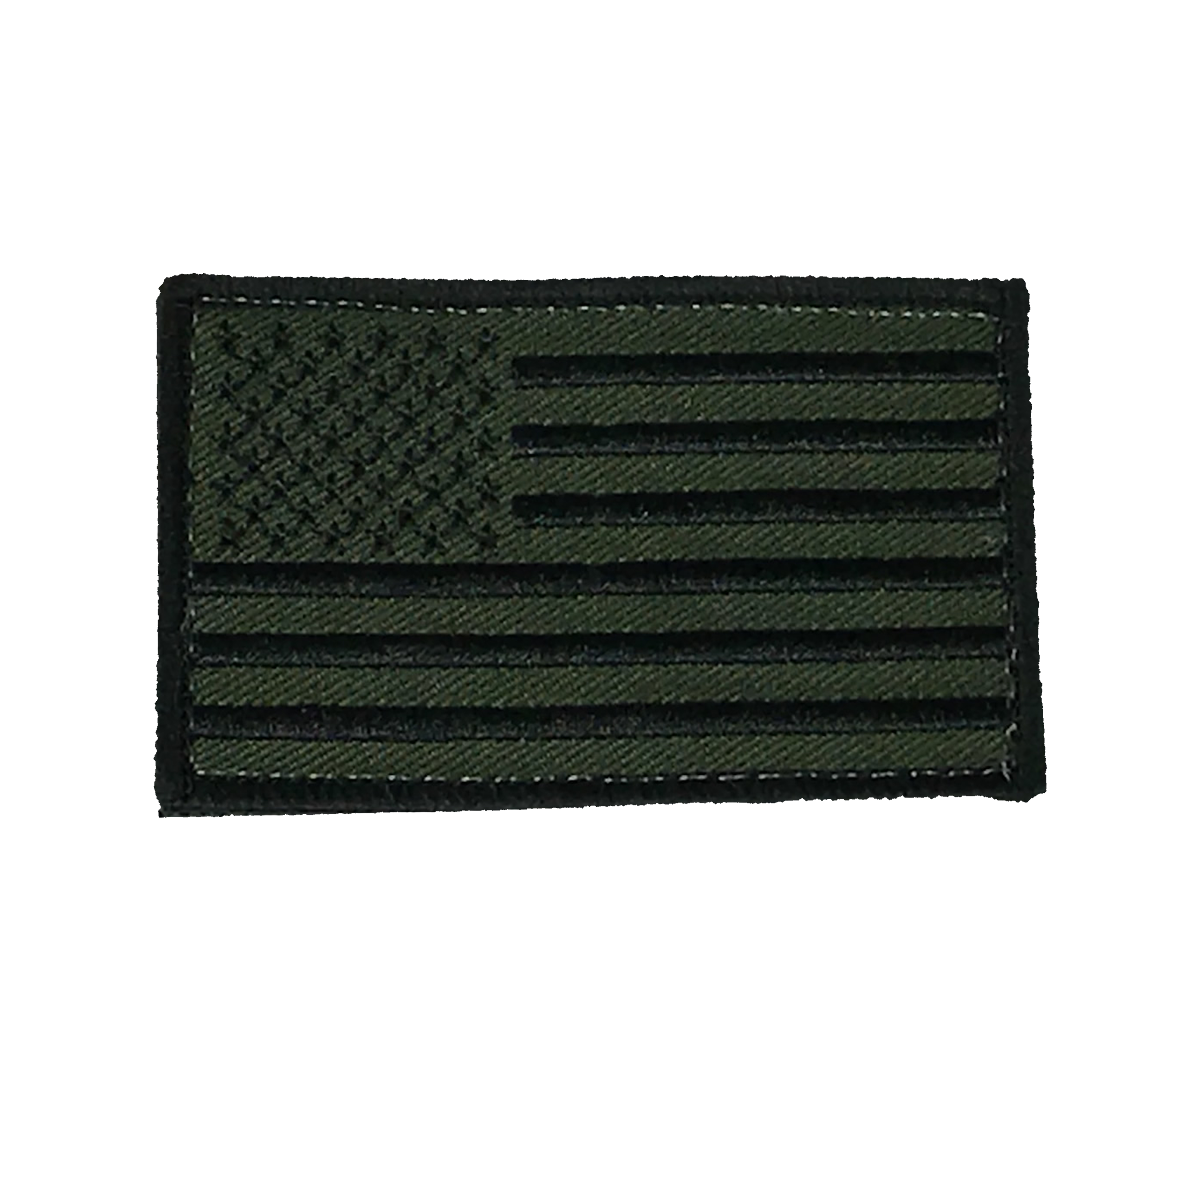 OLIVE DRAB OD GREEN SUBDUED AMERICAN FLAG PATCH HOOK AND LOOP BACK